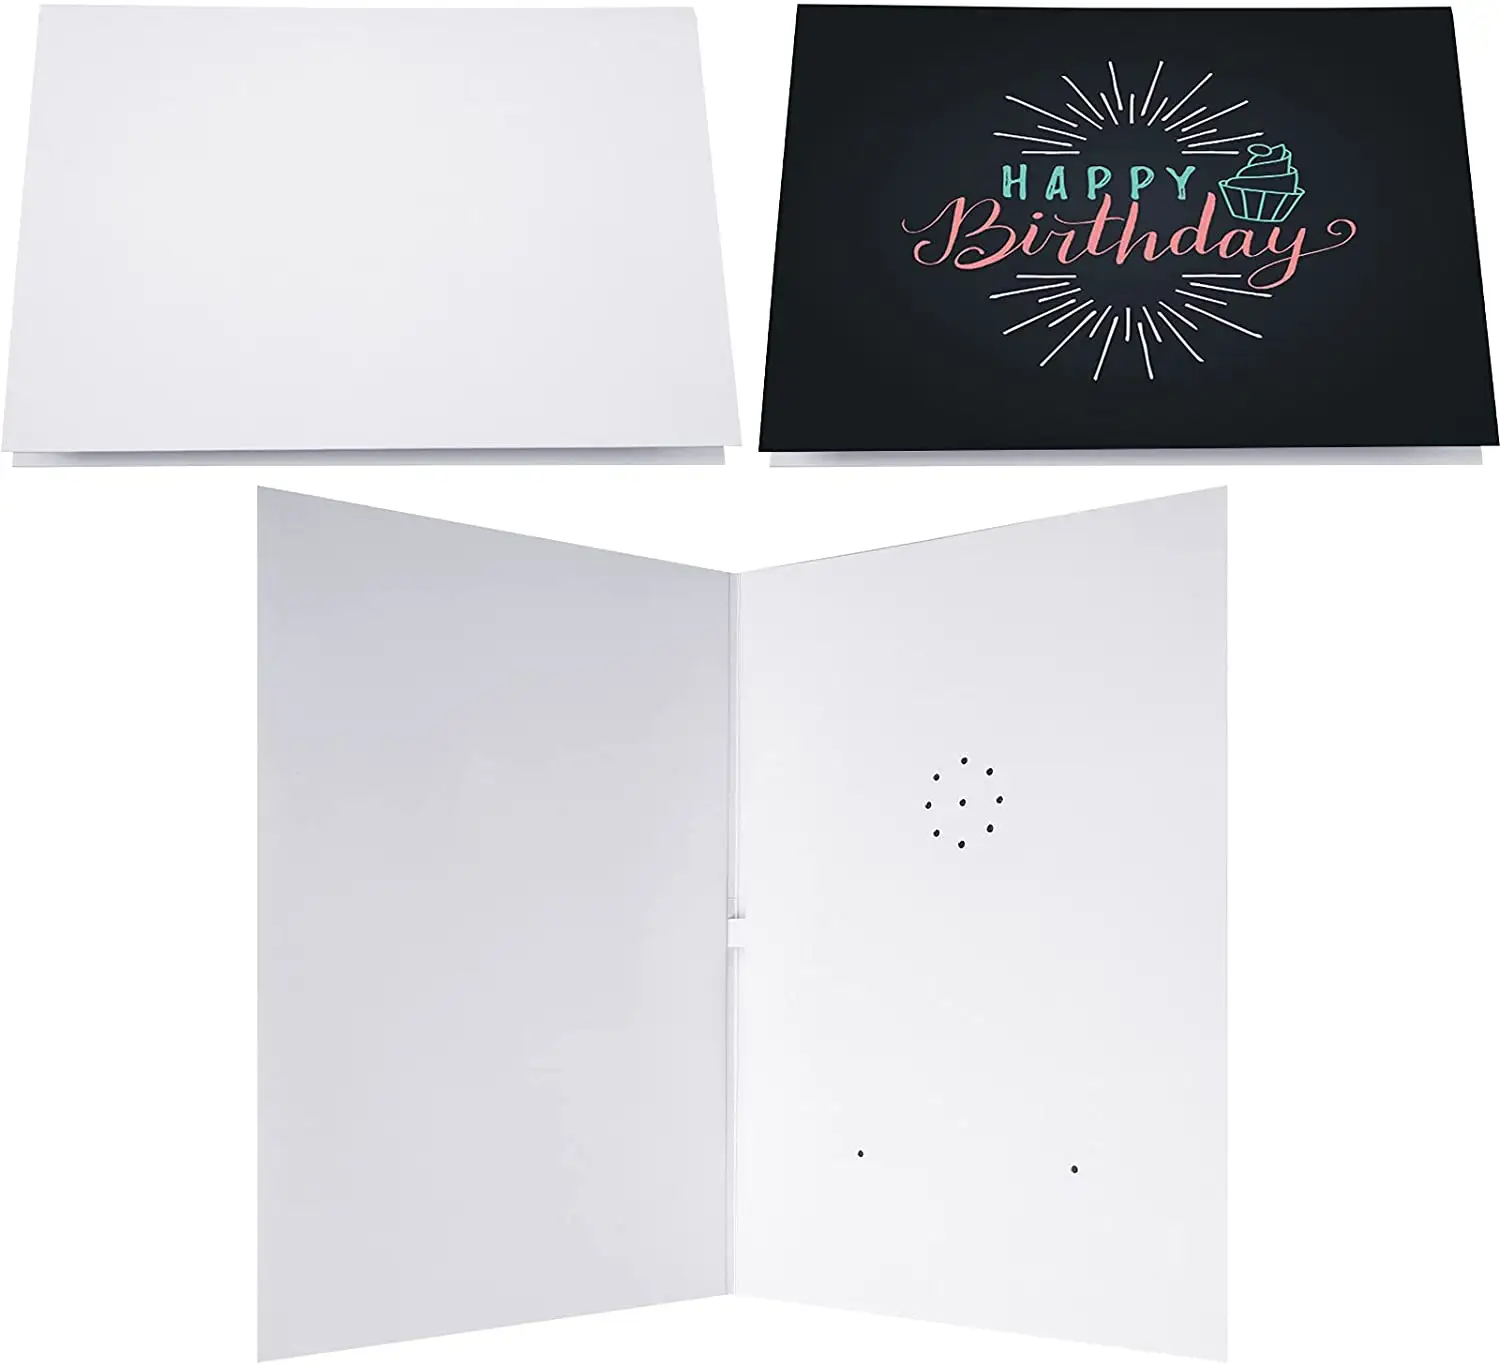 blank greeting card with recordable sound voice greeting sound recording card talking audio greeting card